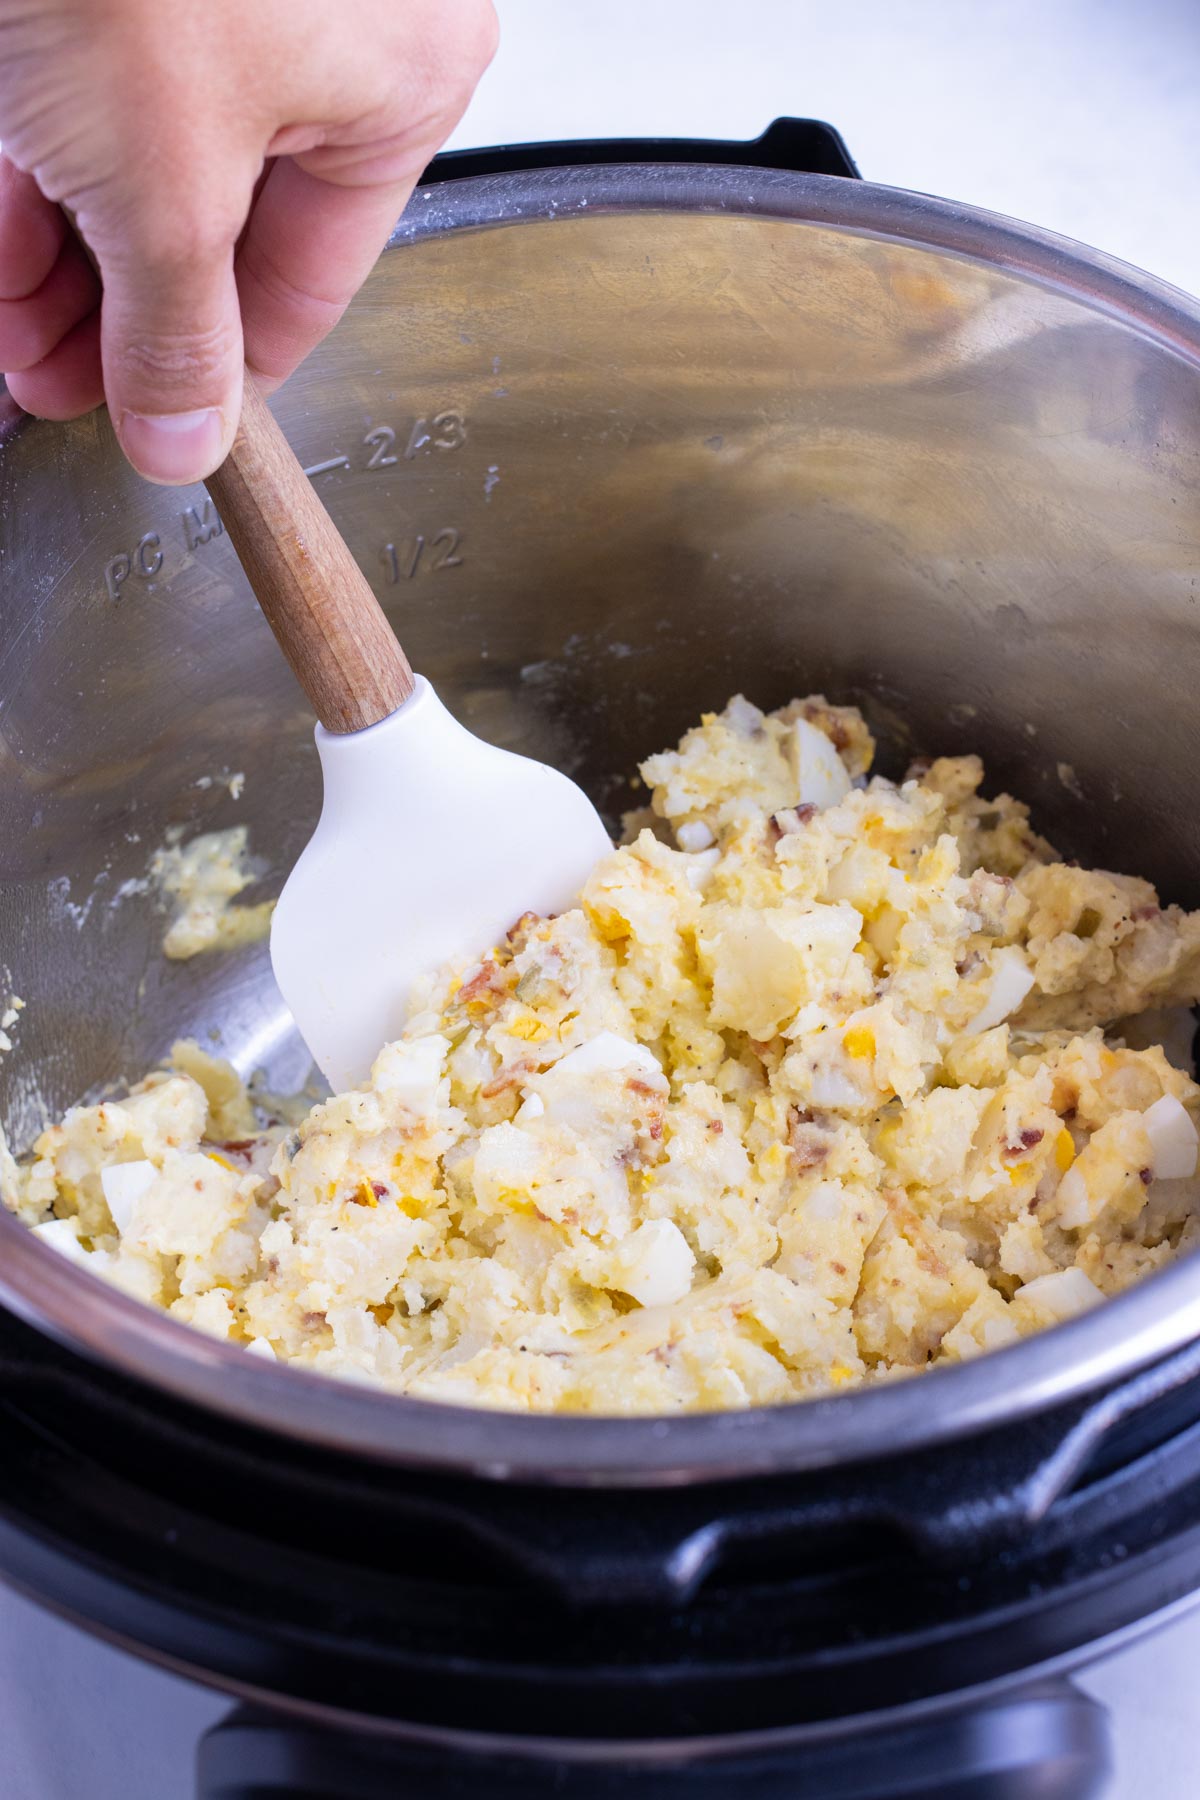 Dressing is added and mixed into the potato salad.